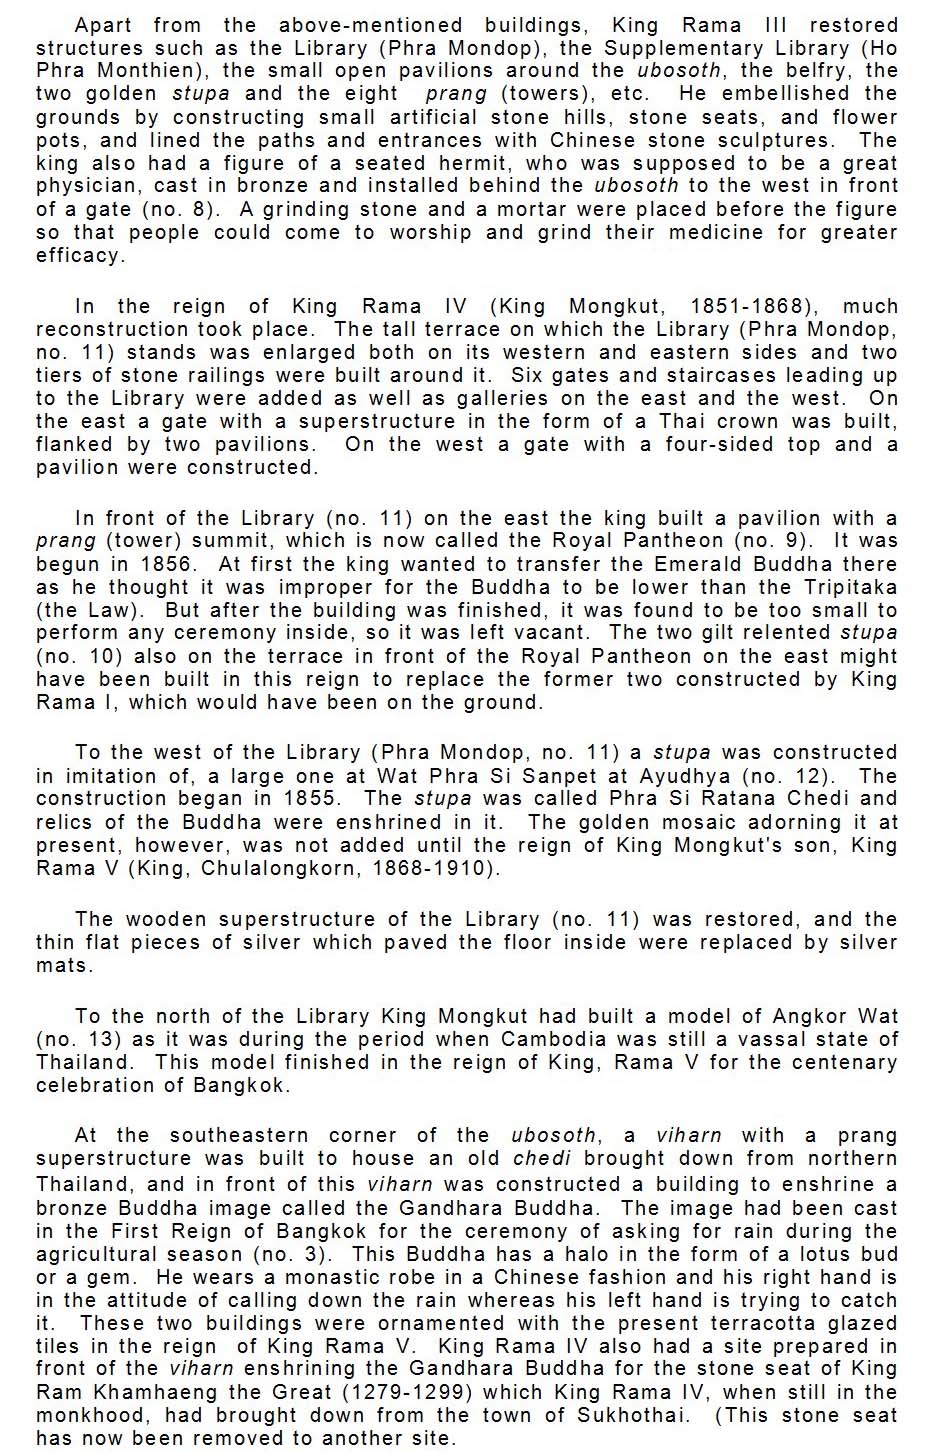 History of the Emerald Buddha page 7